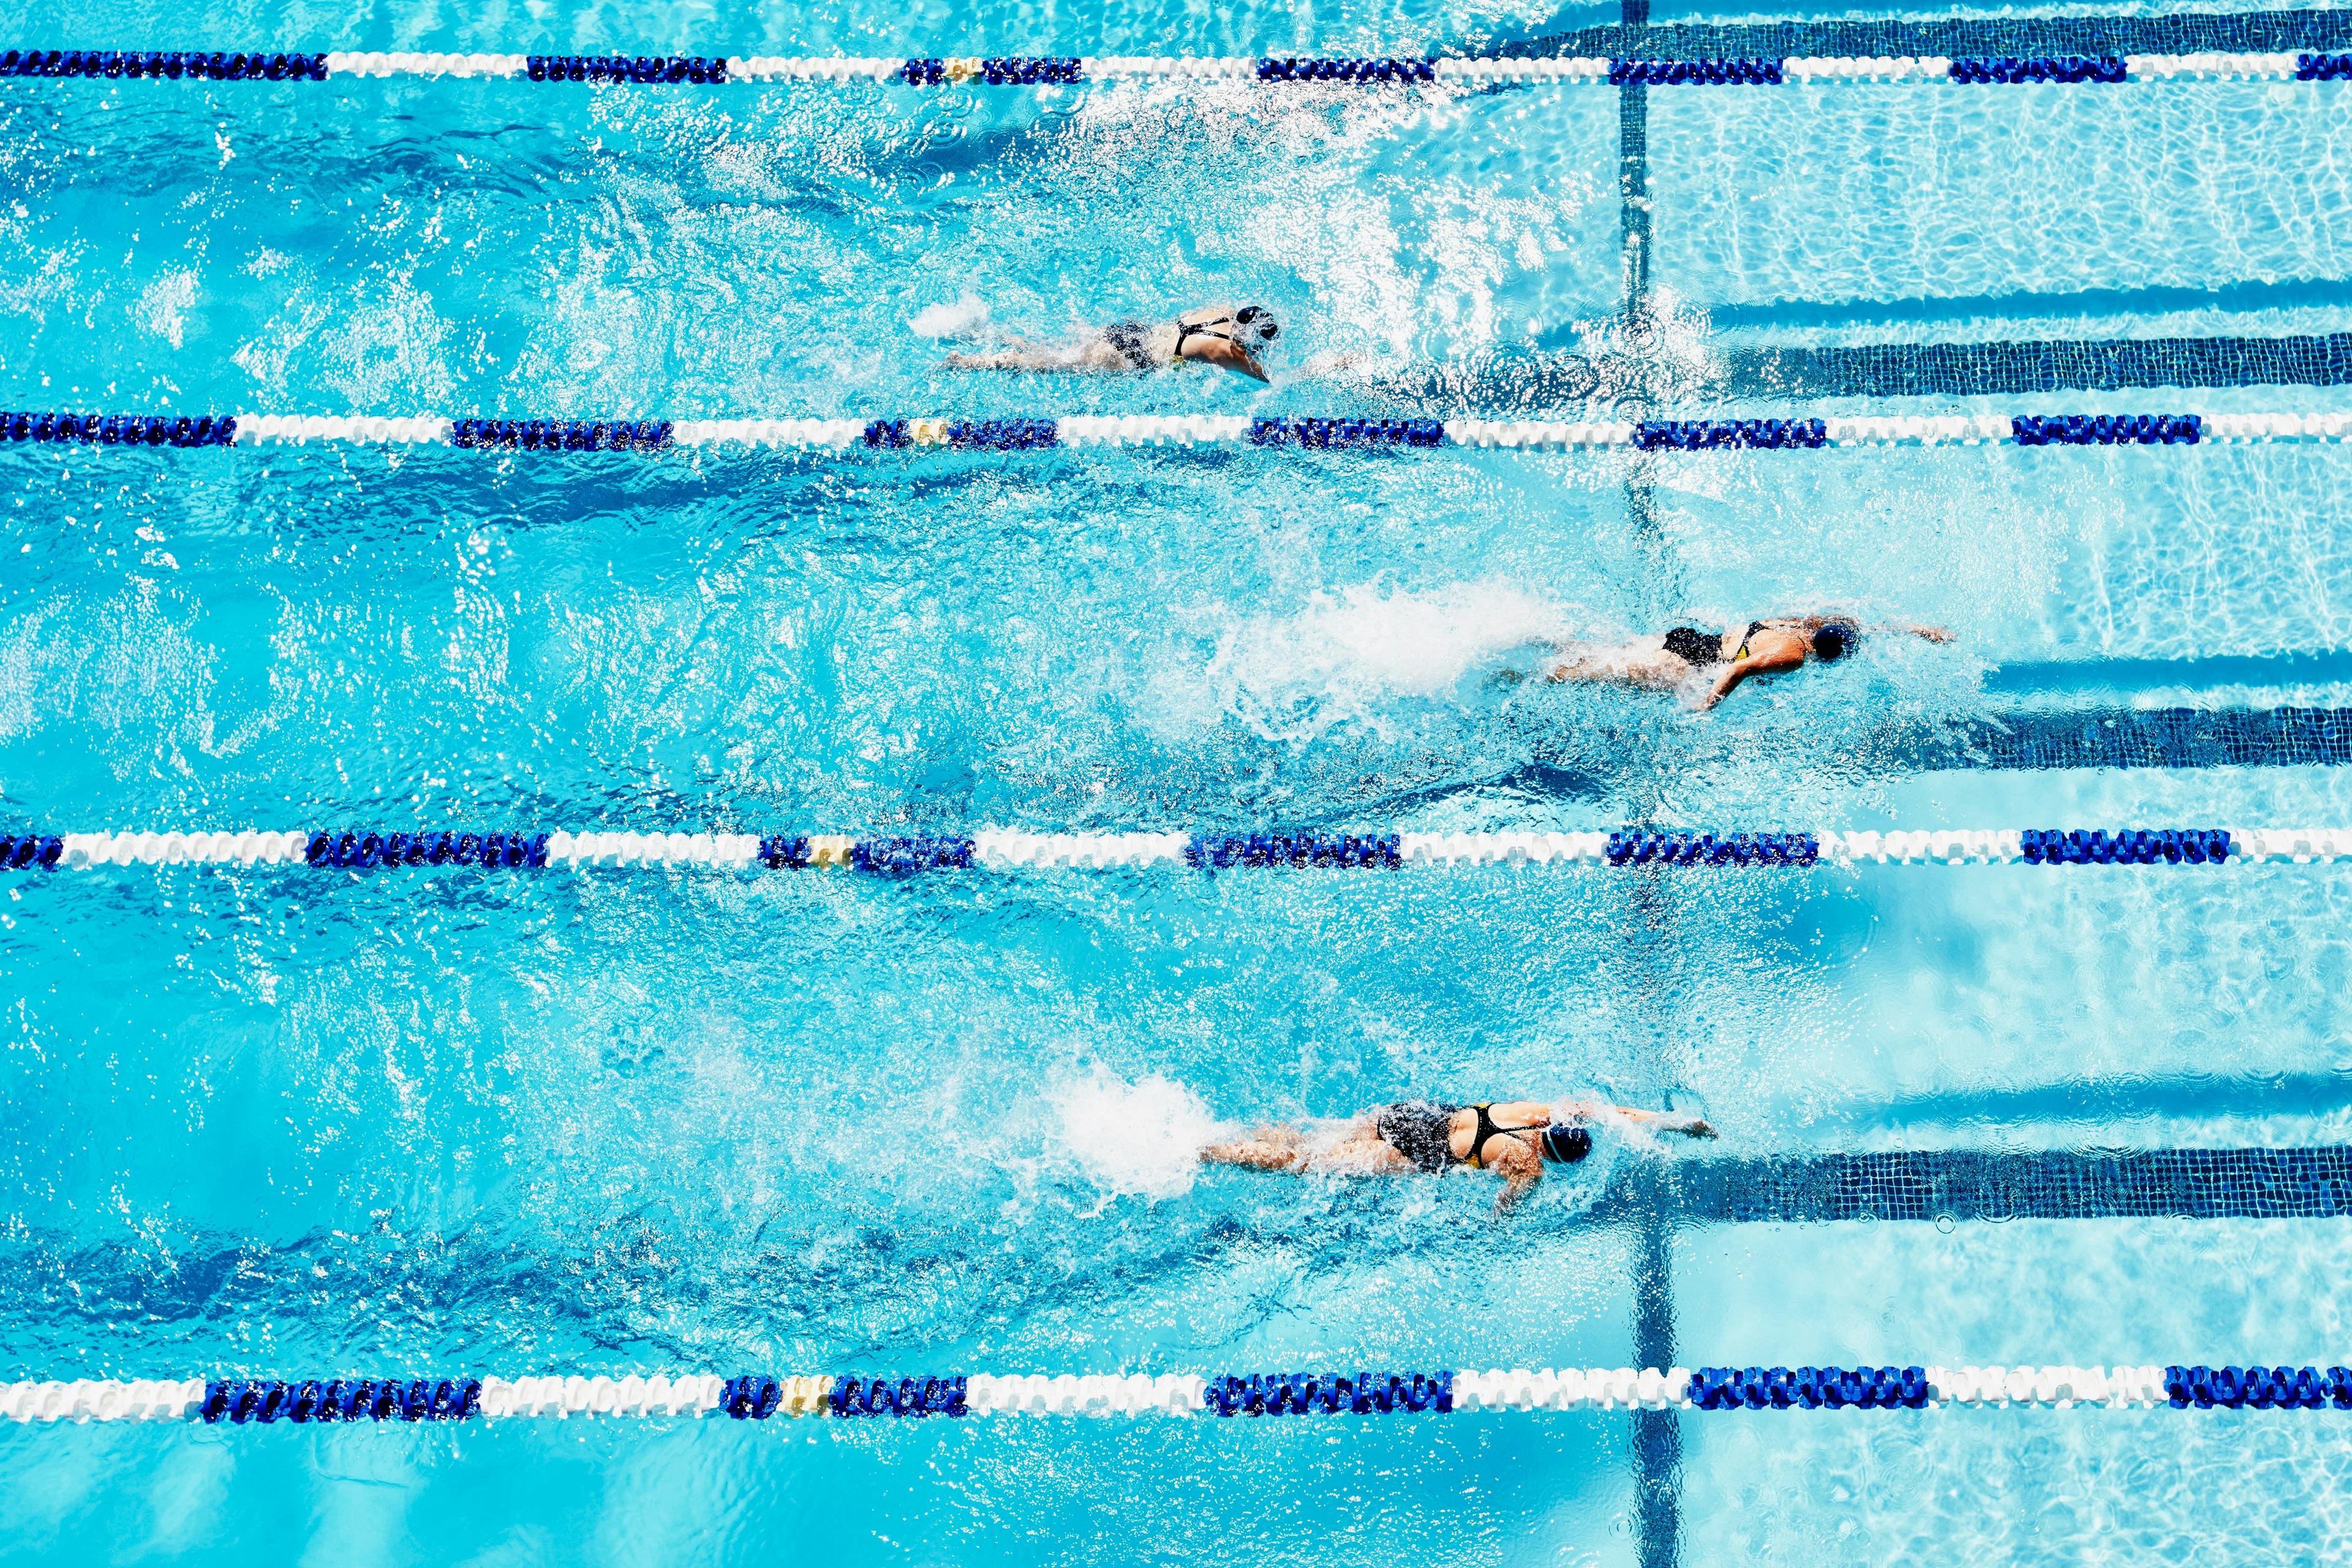 Competitive swimmers racing in an outdoor pool